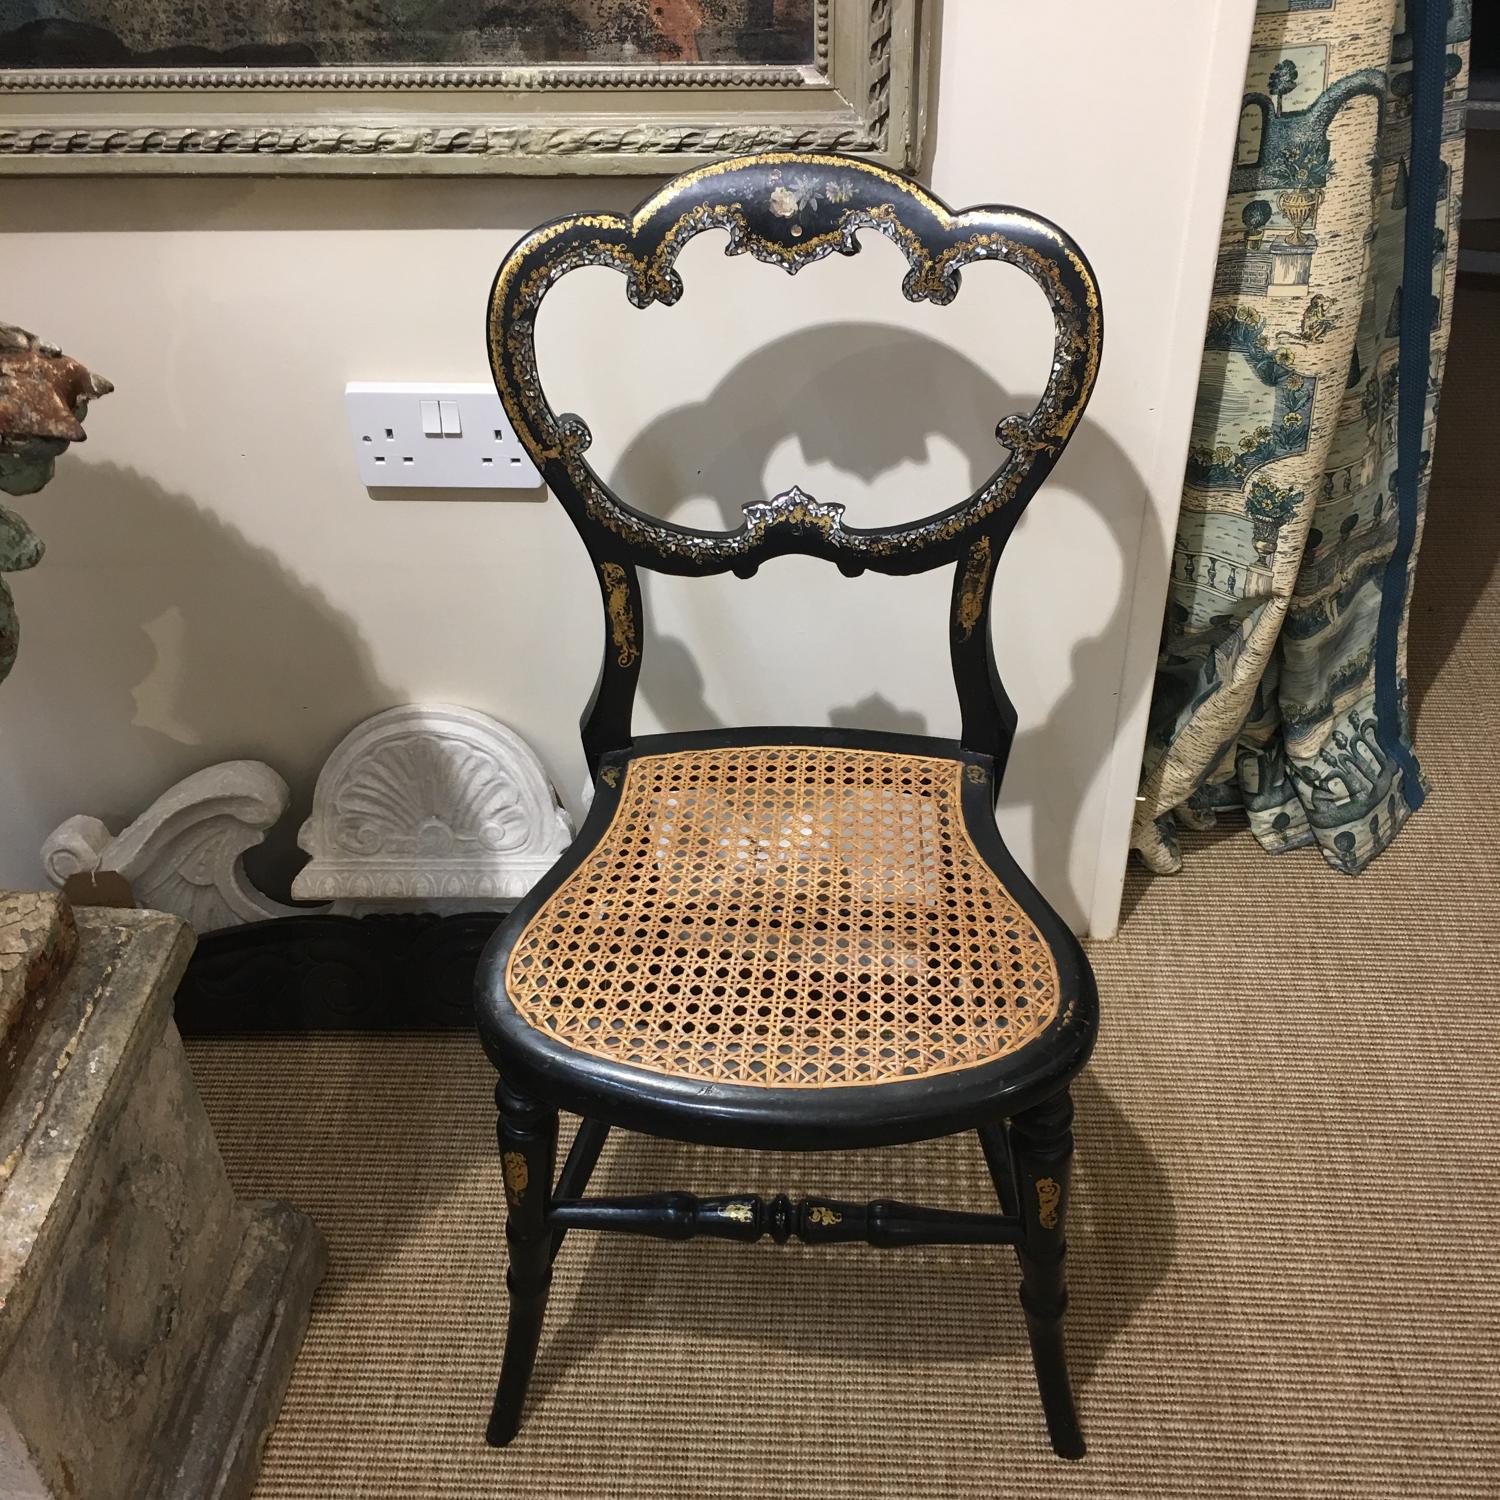 Antique victorian chair with mother of pearl inlay